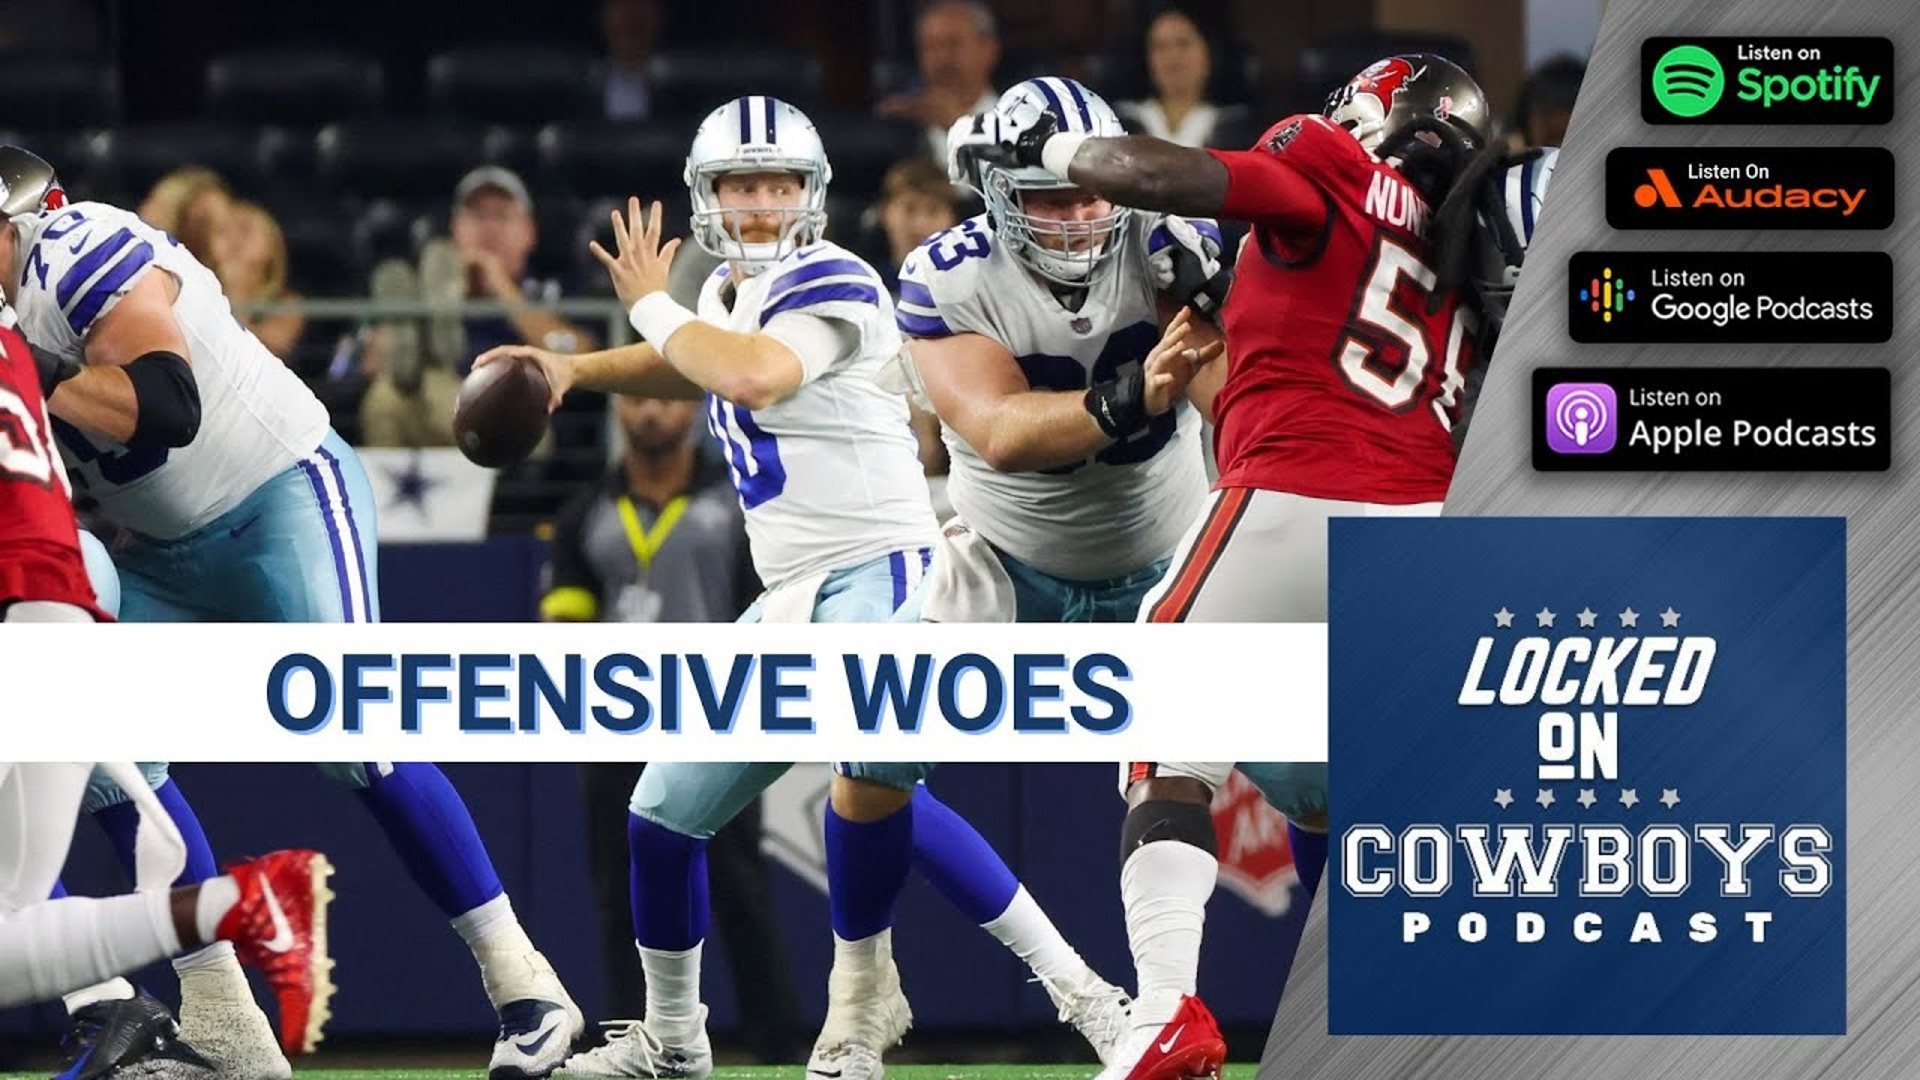 Marcus Mosher and Landon McCool discuss the Dallas Cowboys falling to the Tampa Bay Buccaneers in Week 1.